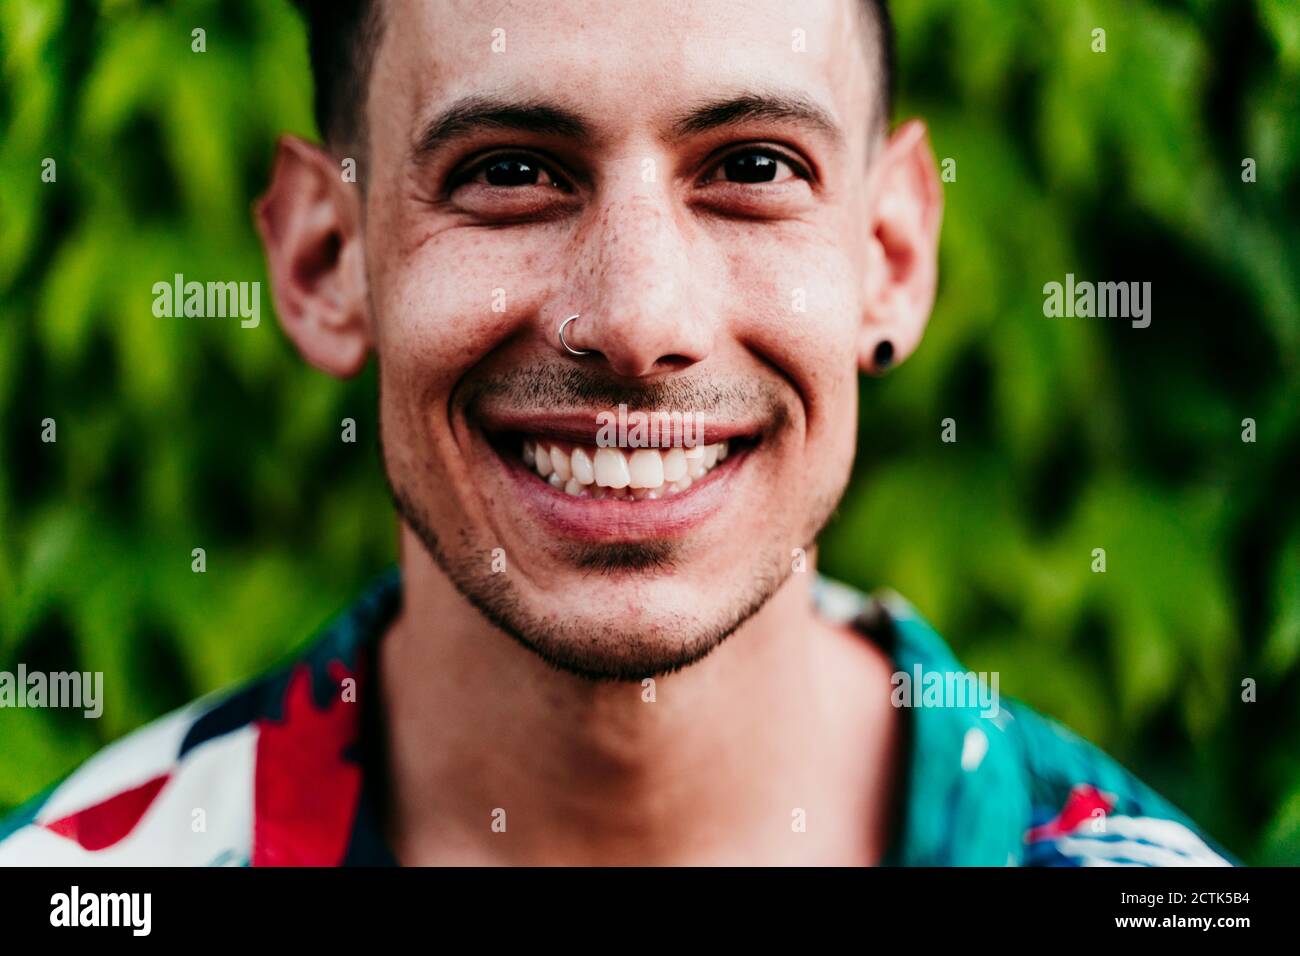 Man wearing nose ring smiling while standing against ivy hedge Stock Photo